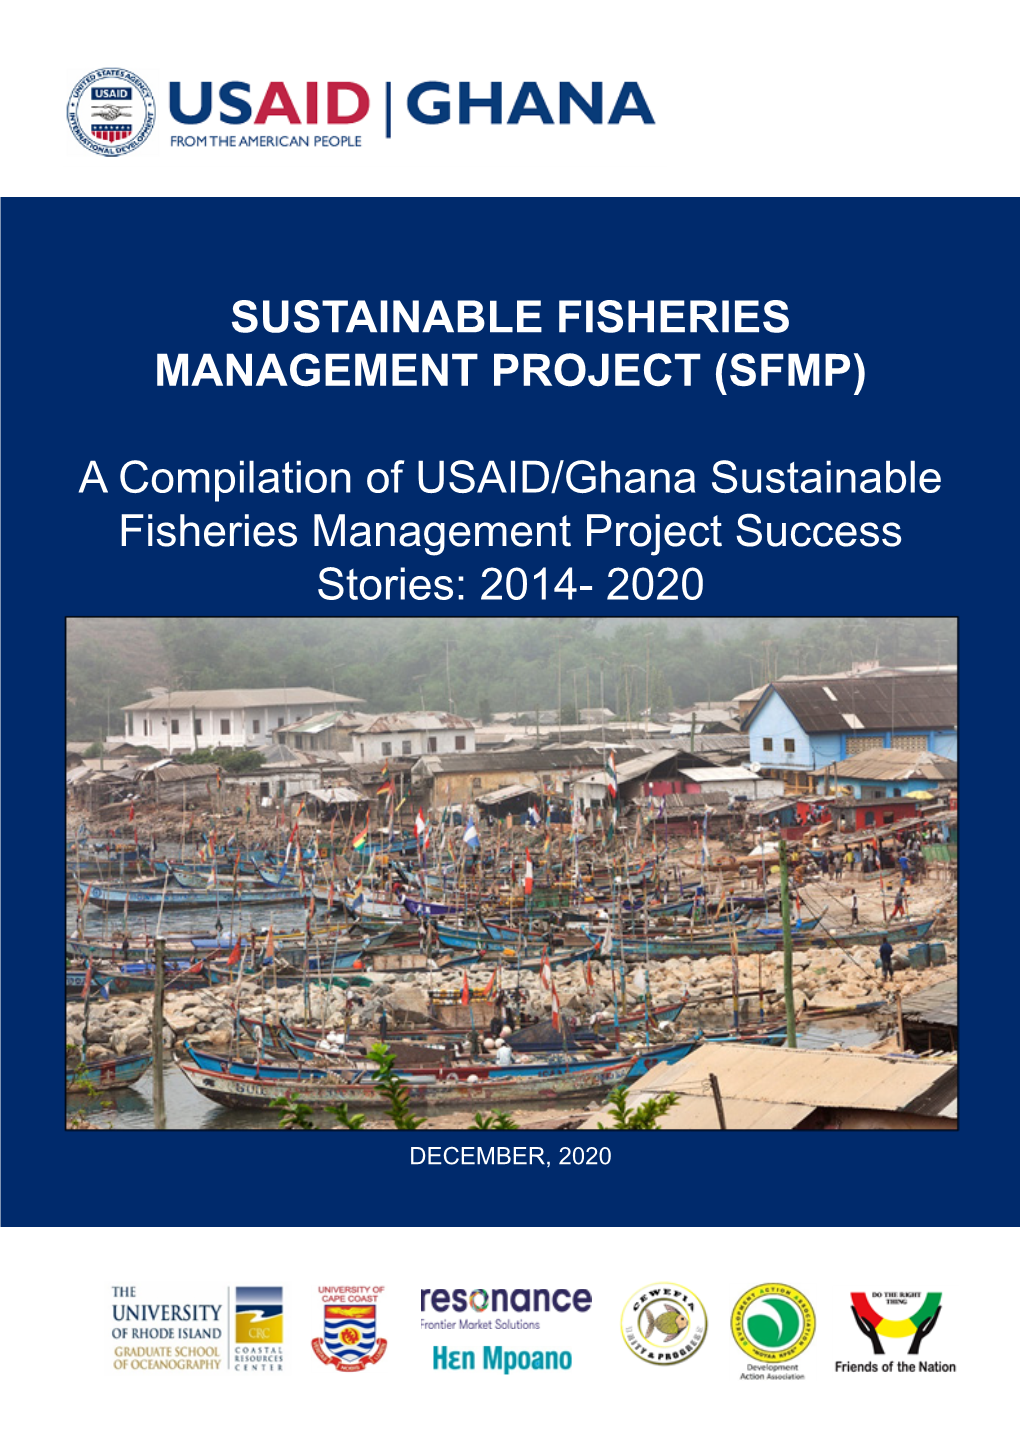 (SFMP) a Compilation of USAID/Ghana Sustainable Fisheries Management Project Success S